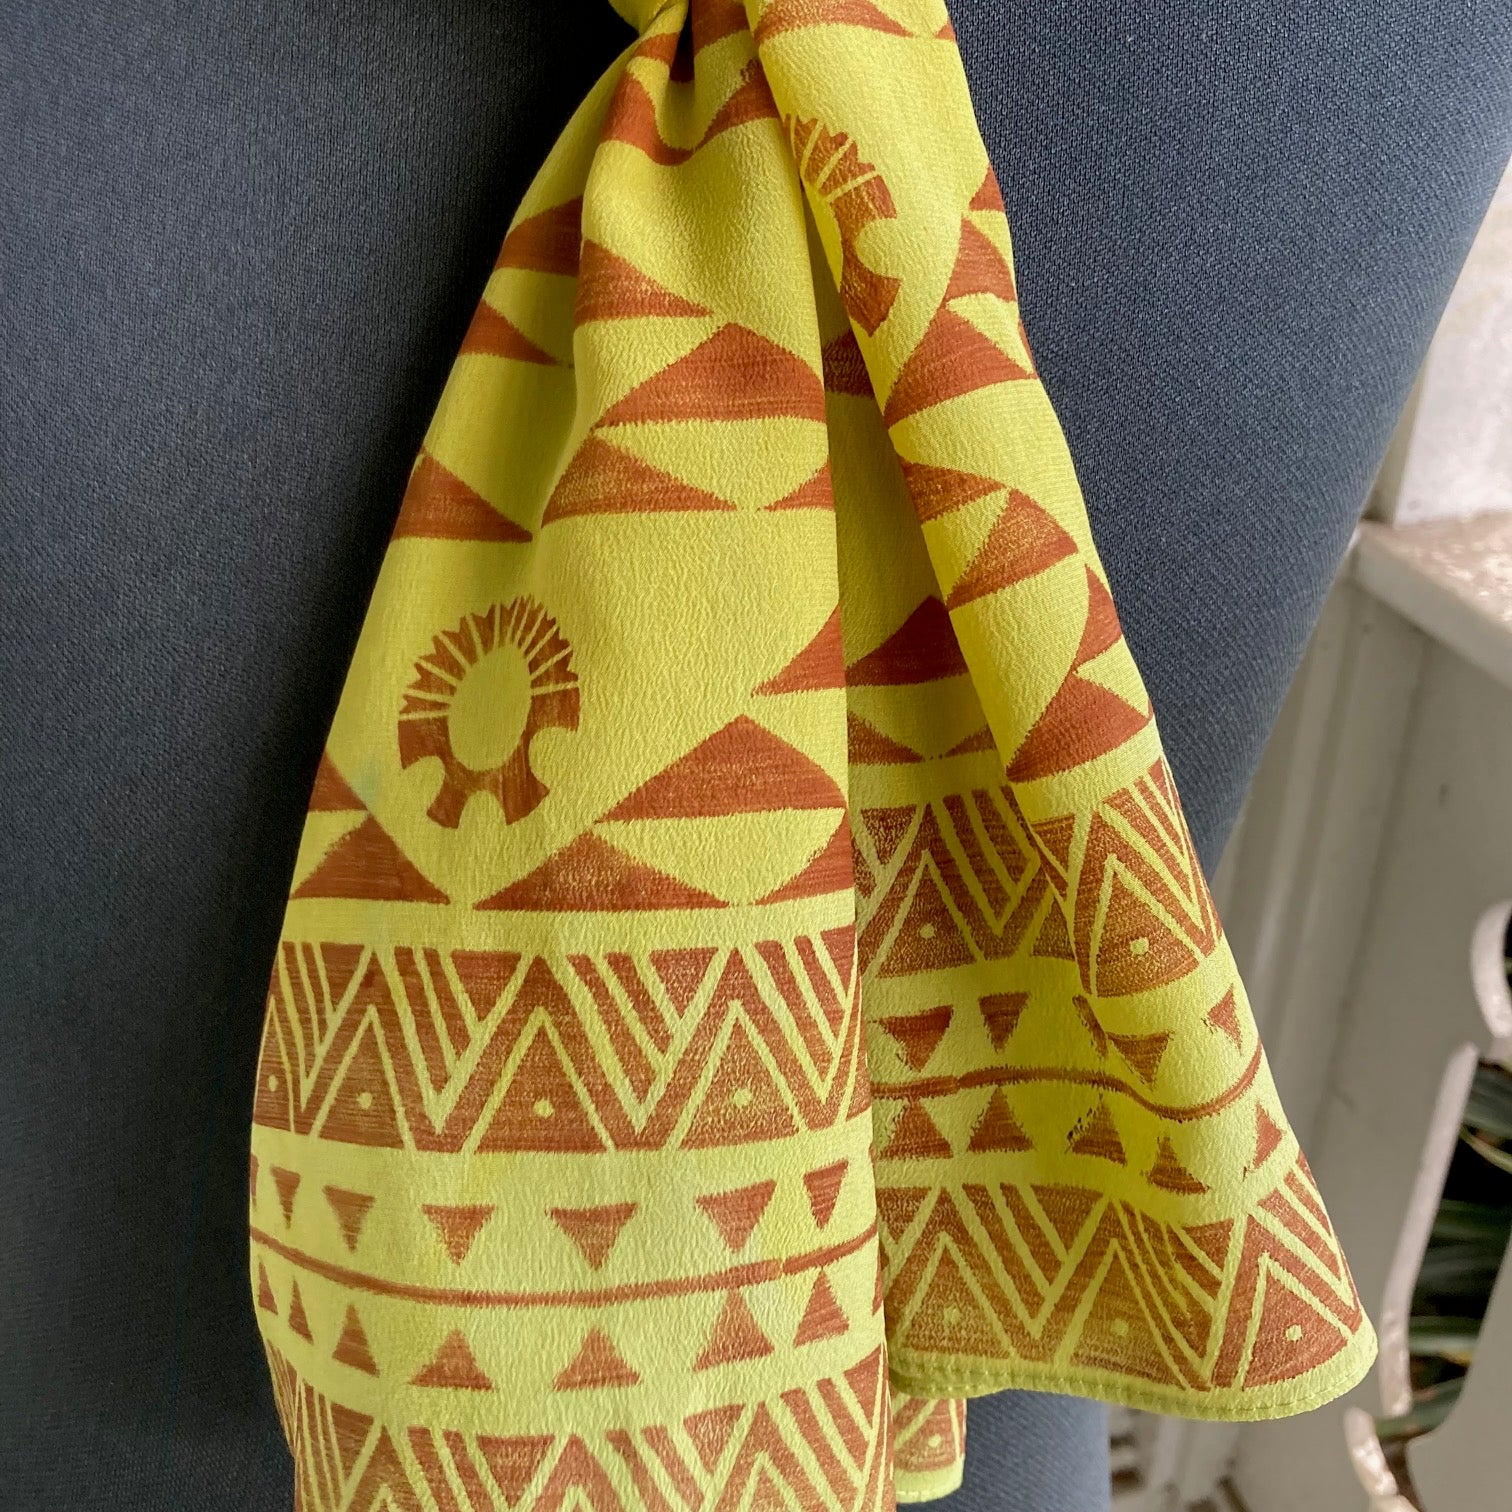 Ohe Kapala Silk Crepe Scarf in Yellow with the Mauna and Day/Night